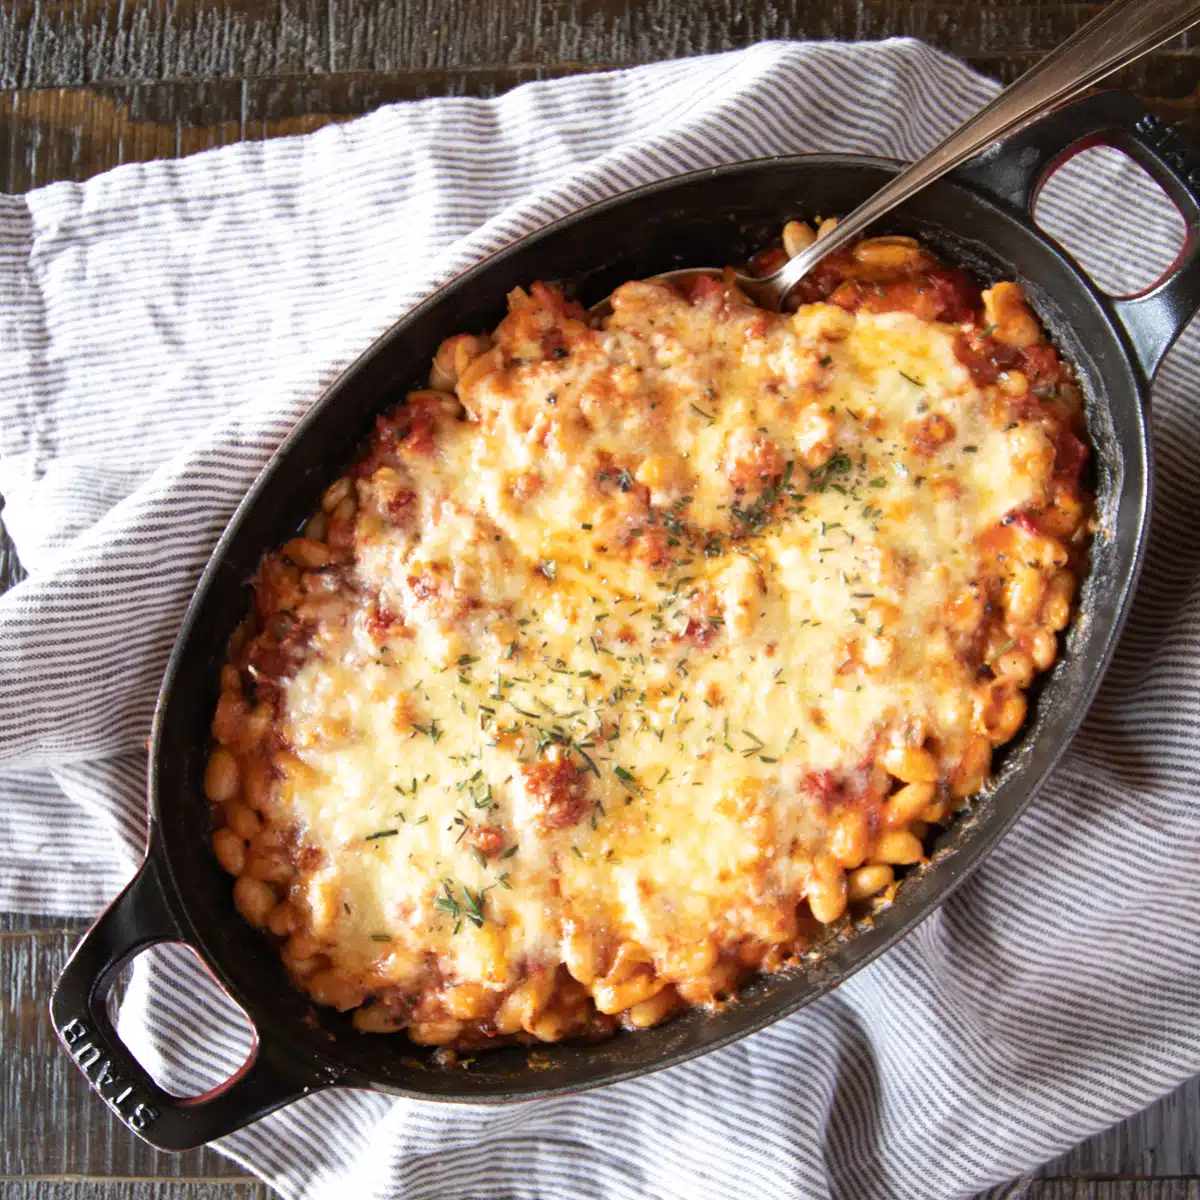 A baked bean and tomato casserole topped with cheese and rosemary.